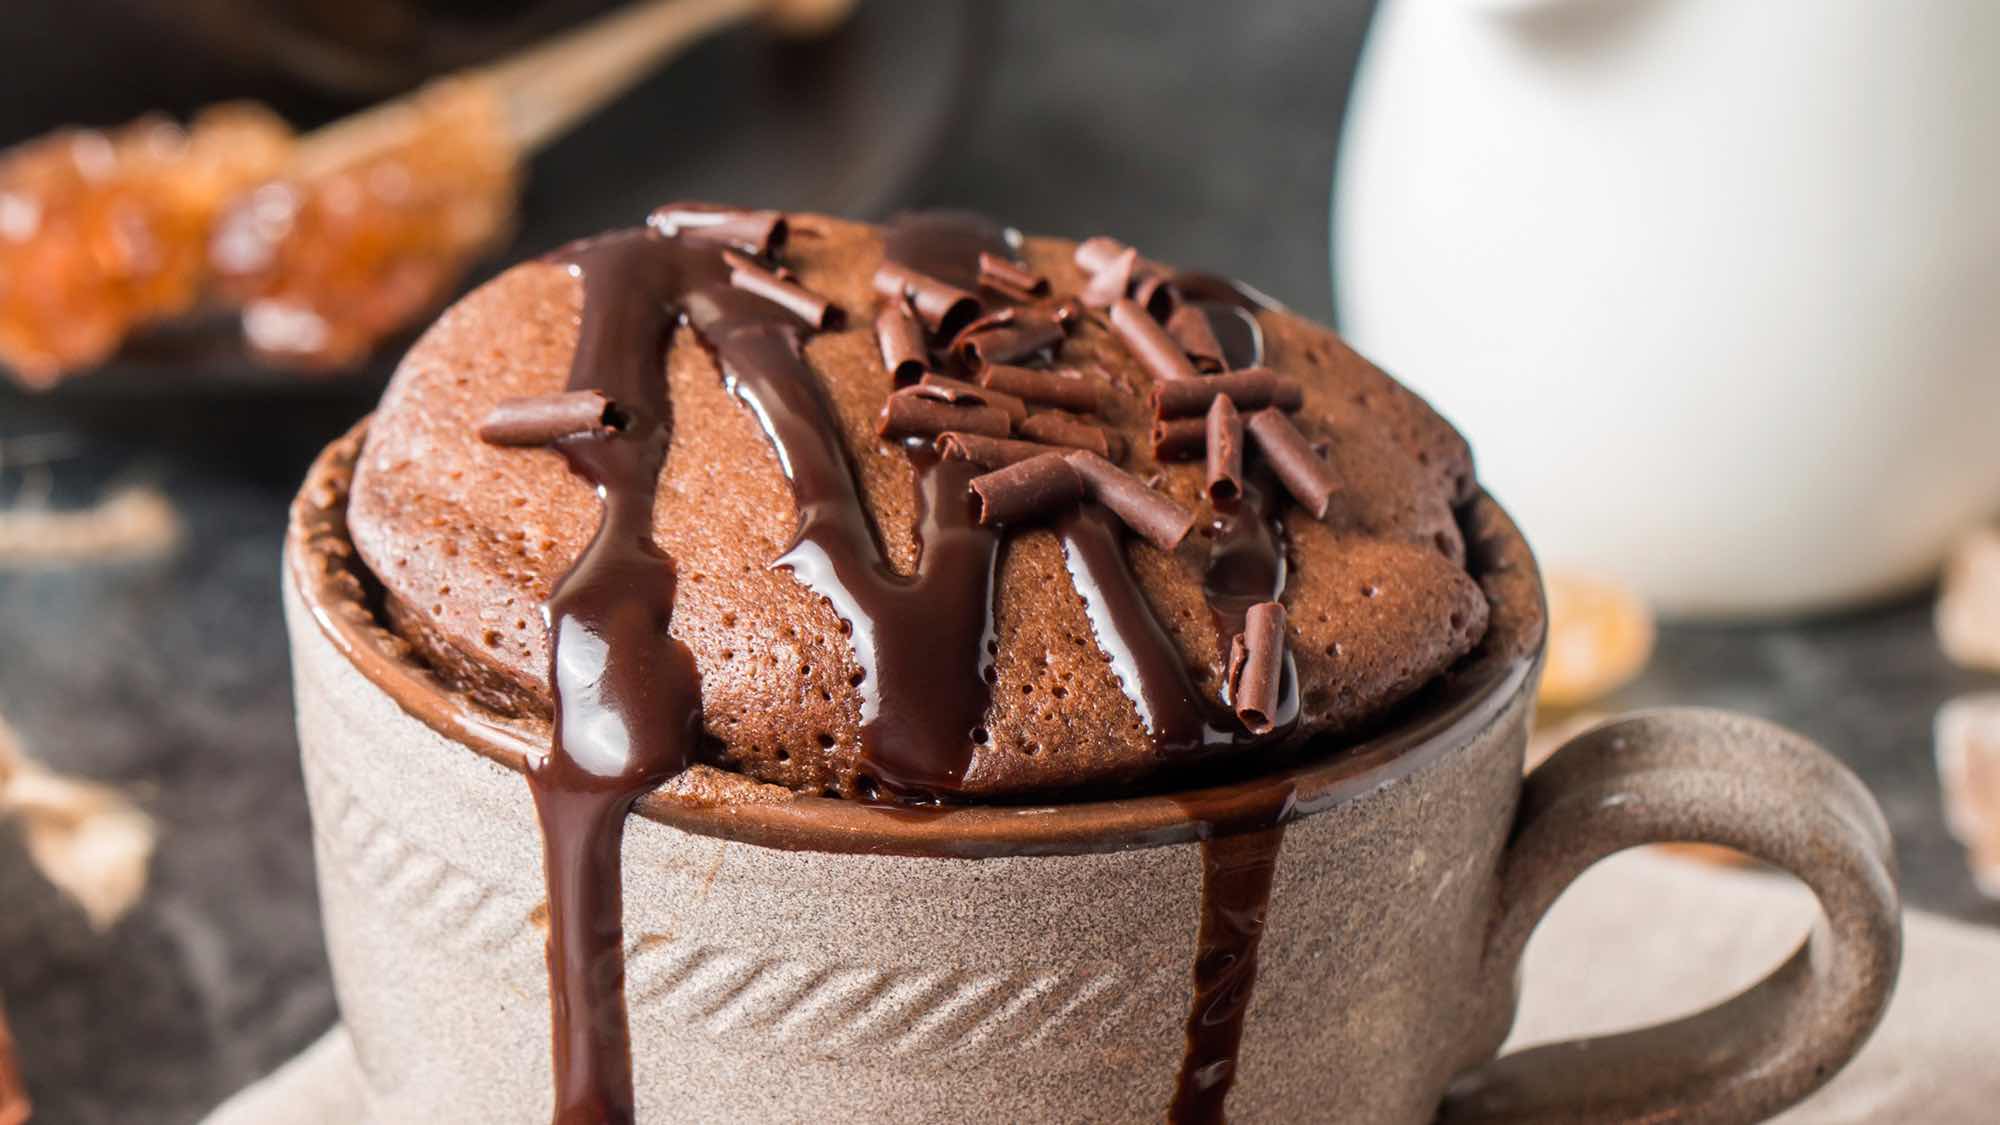 🍪 Only a True Chocoholic Will Have Eaten at Least 13/25 of These Treats Hot Chocolate Pot